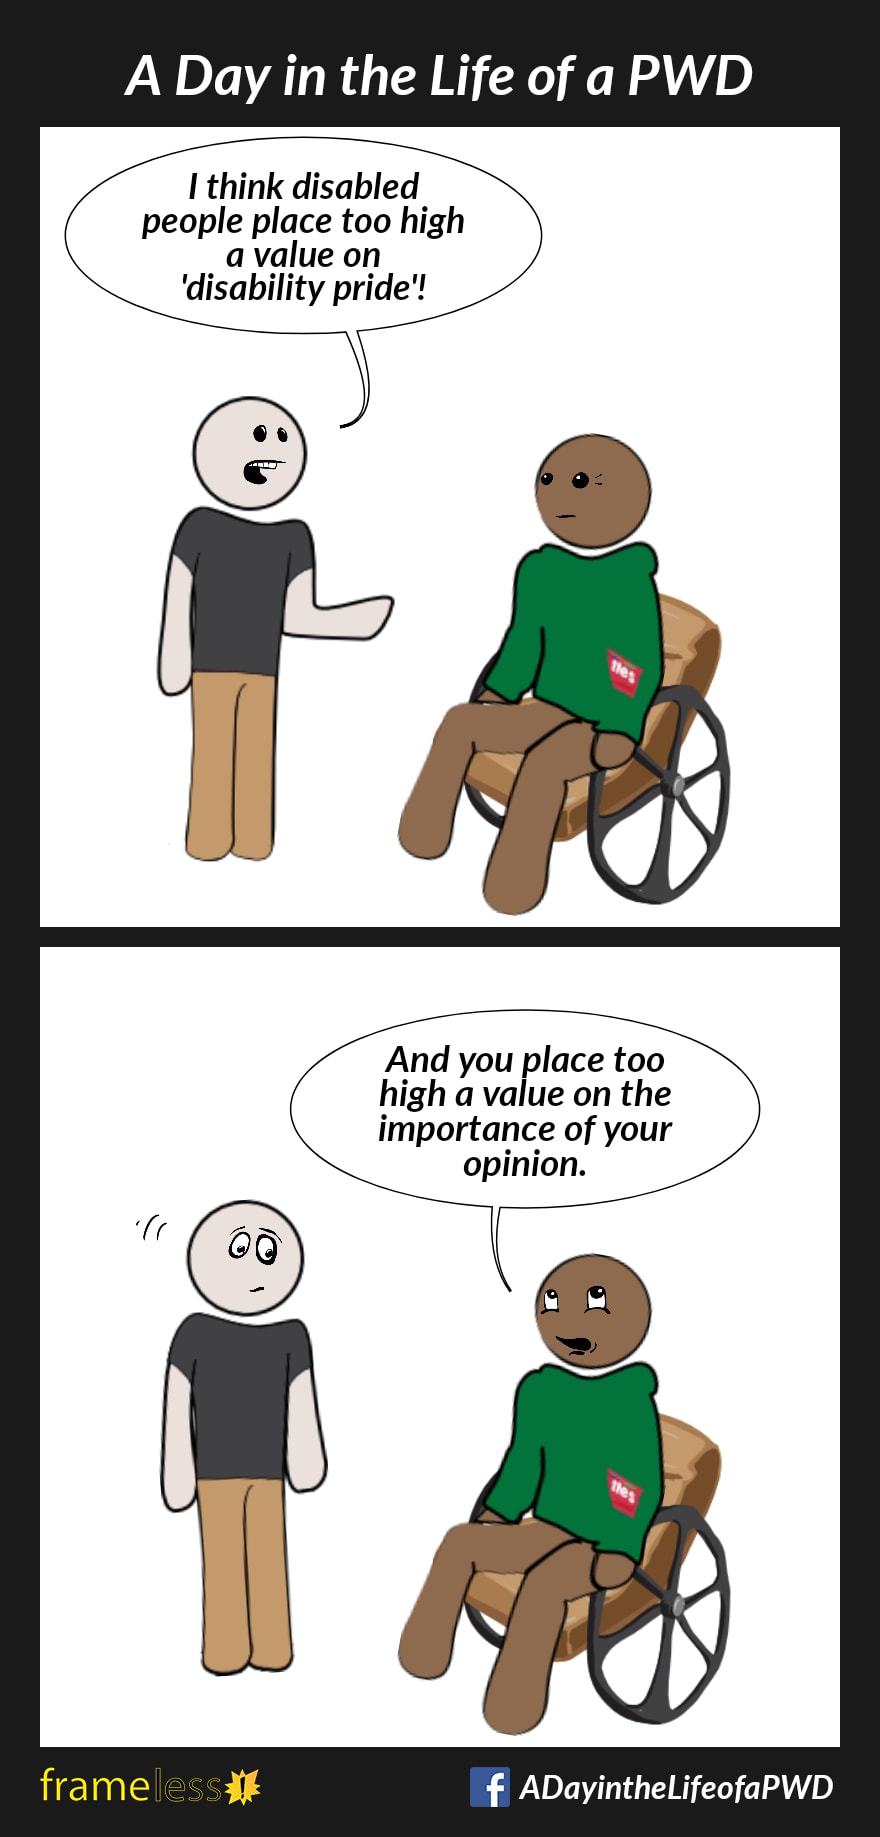 COMIC STRIP 
A Day in the Life of a PWD (Person With a Disability) 

Frame 1:
A man in a wheelchair is talking to an acquaintance. 
ACQUAINTANCE: I think disabled people place too high a value on 'disability pride'!

Frame 2:
MAN: And you place too high a value on the importance of your opinion